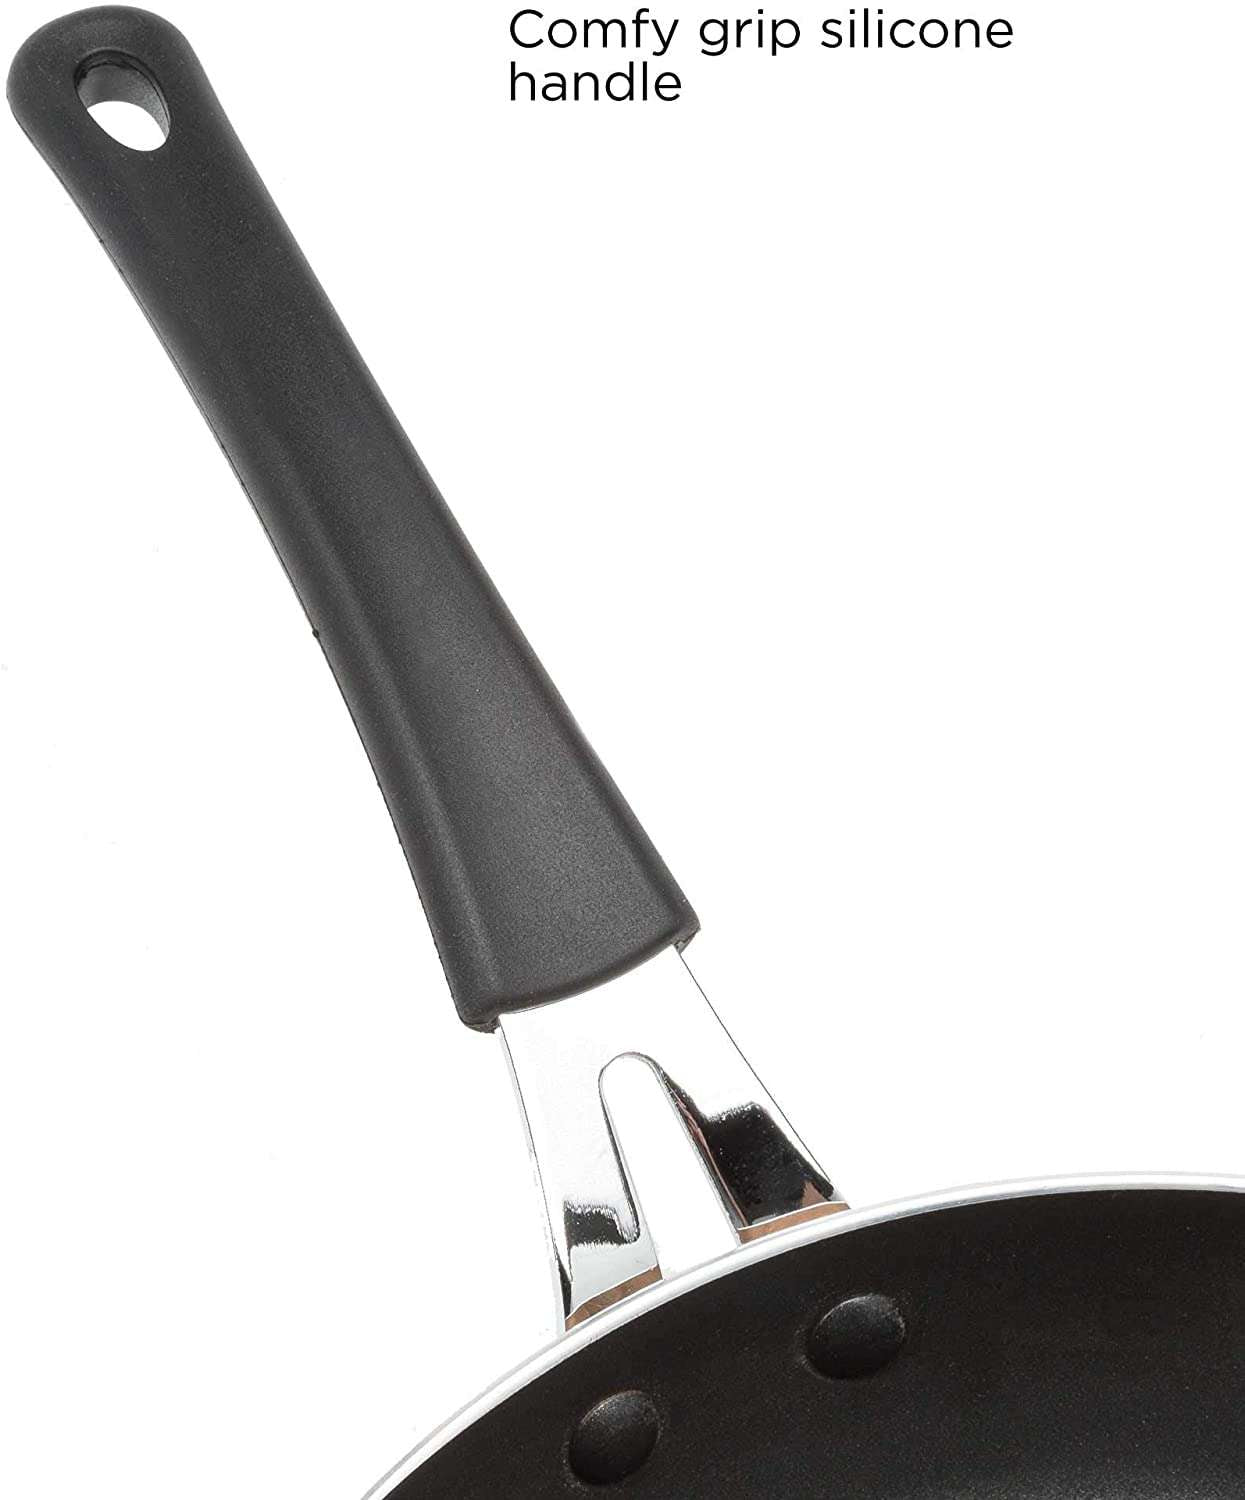 5 Pans That are Less Likely to Warp – Ecolution Cookware